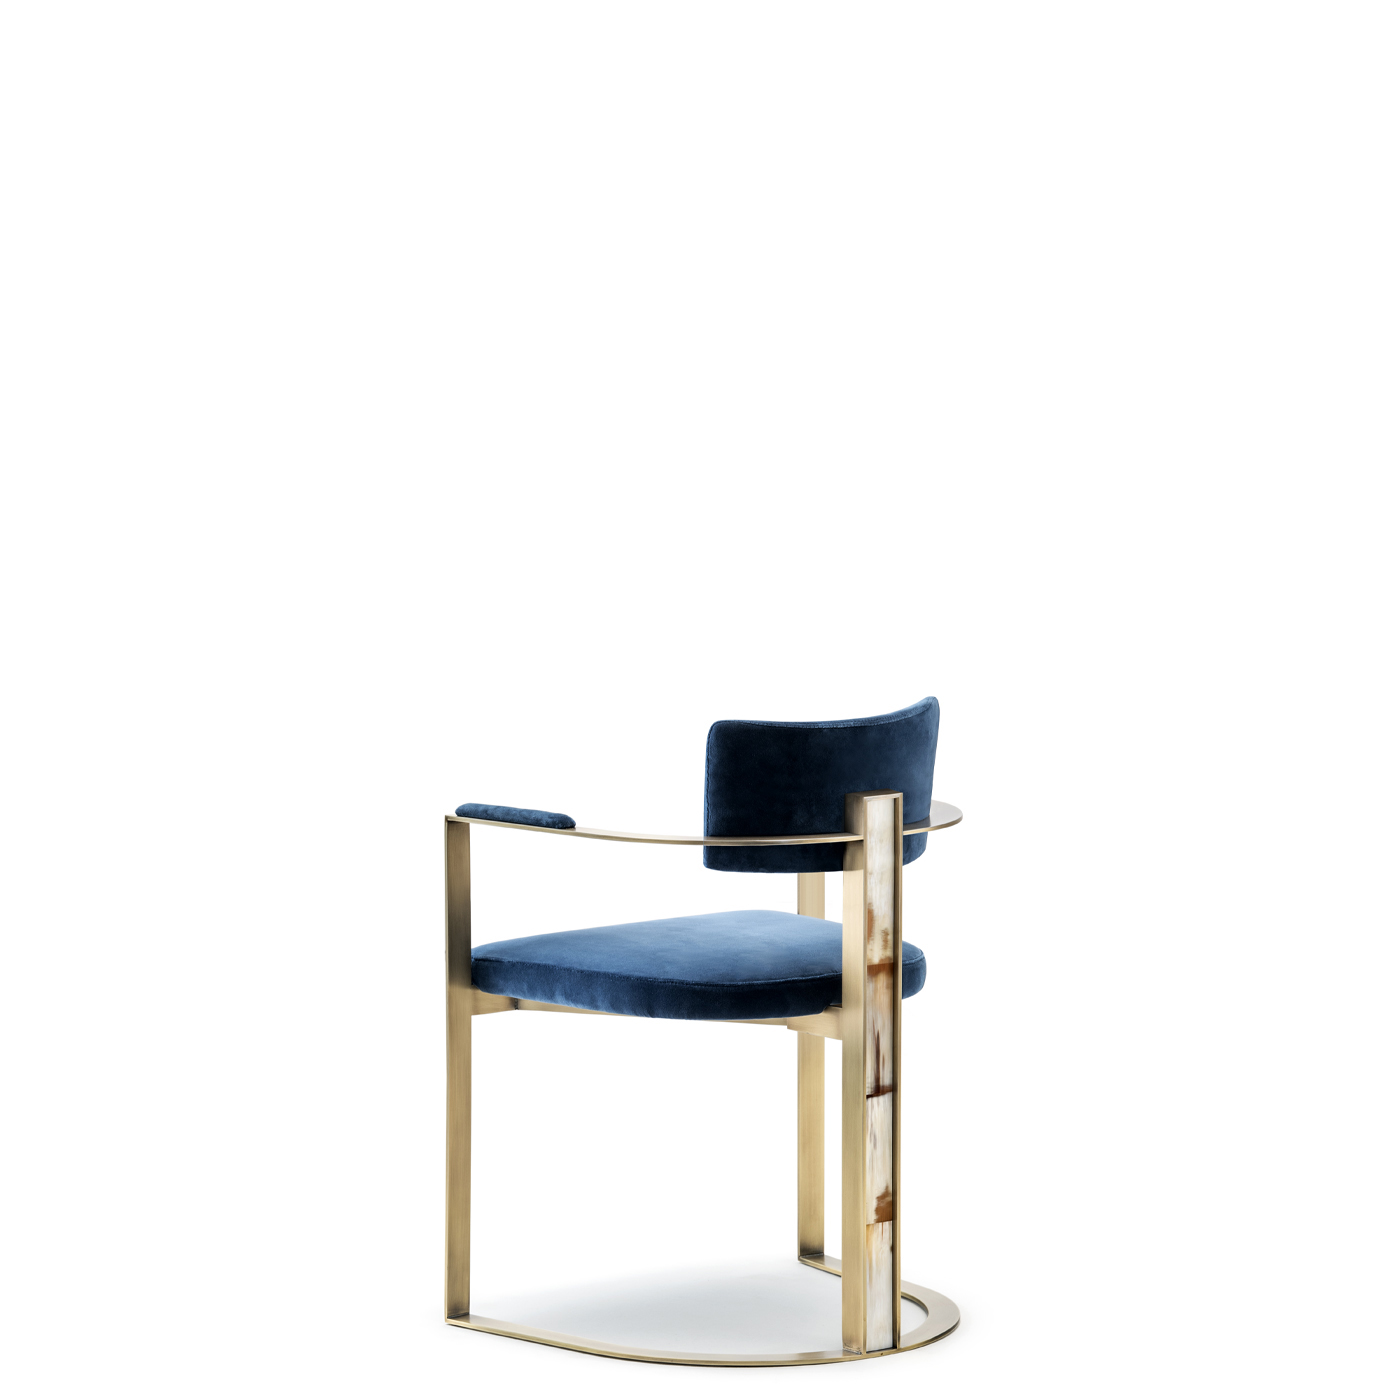 Sofas and seats - Sveva chair in velvet with horn inlays 6043D - Arcahorn